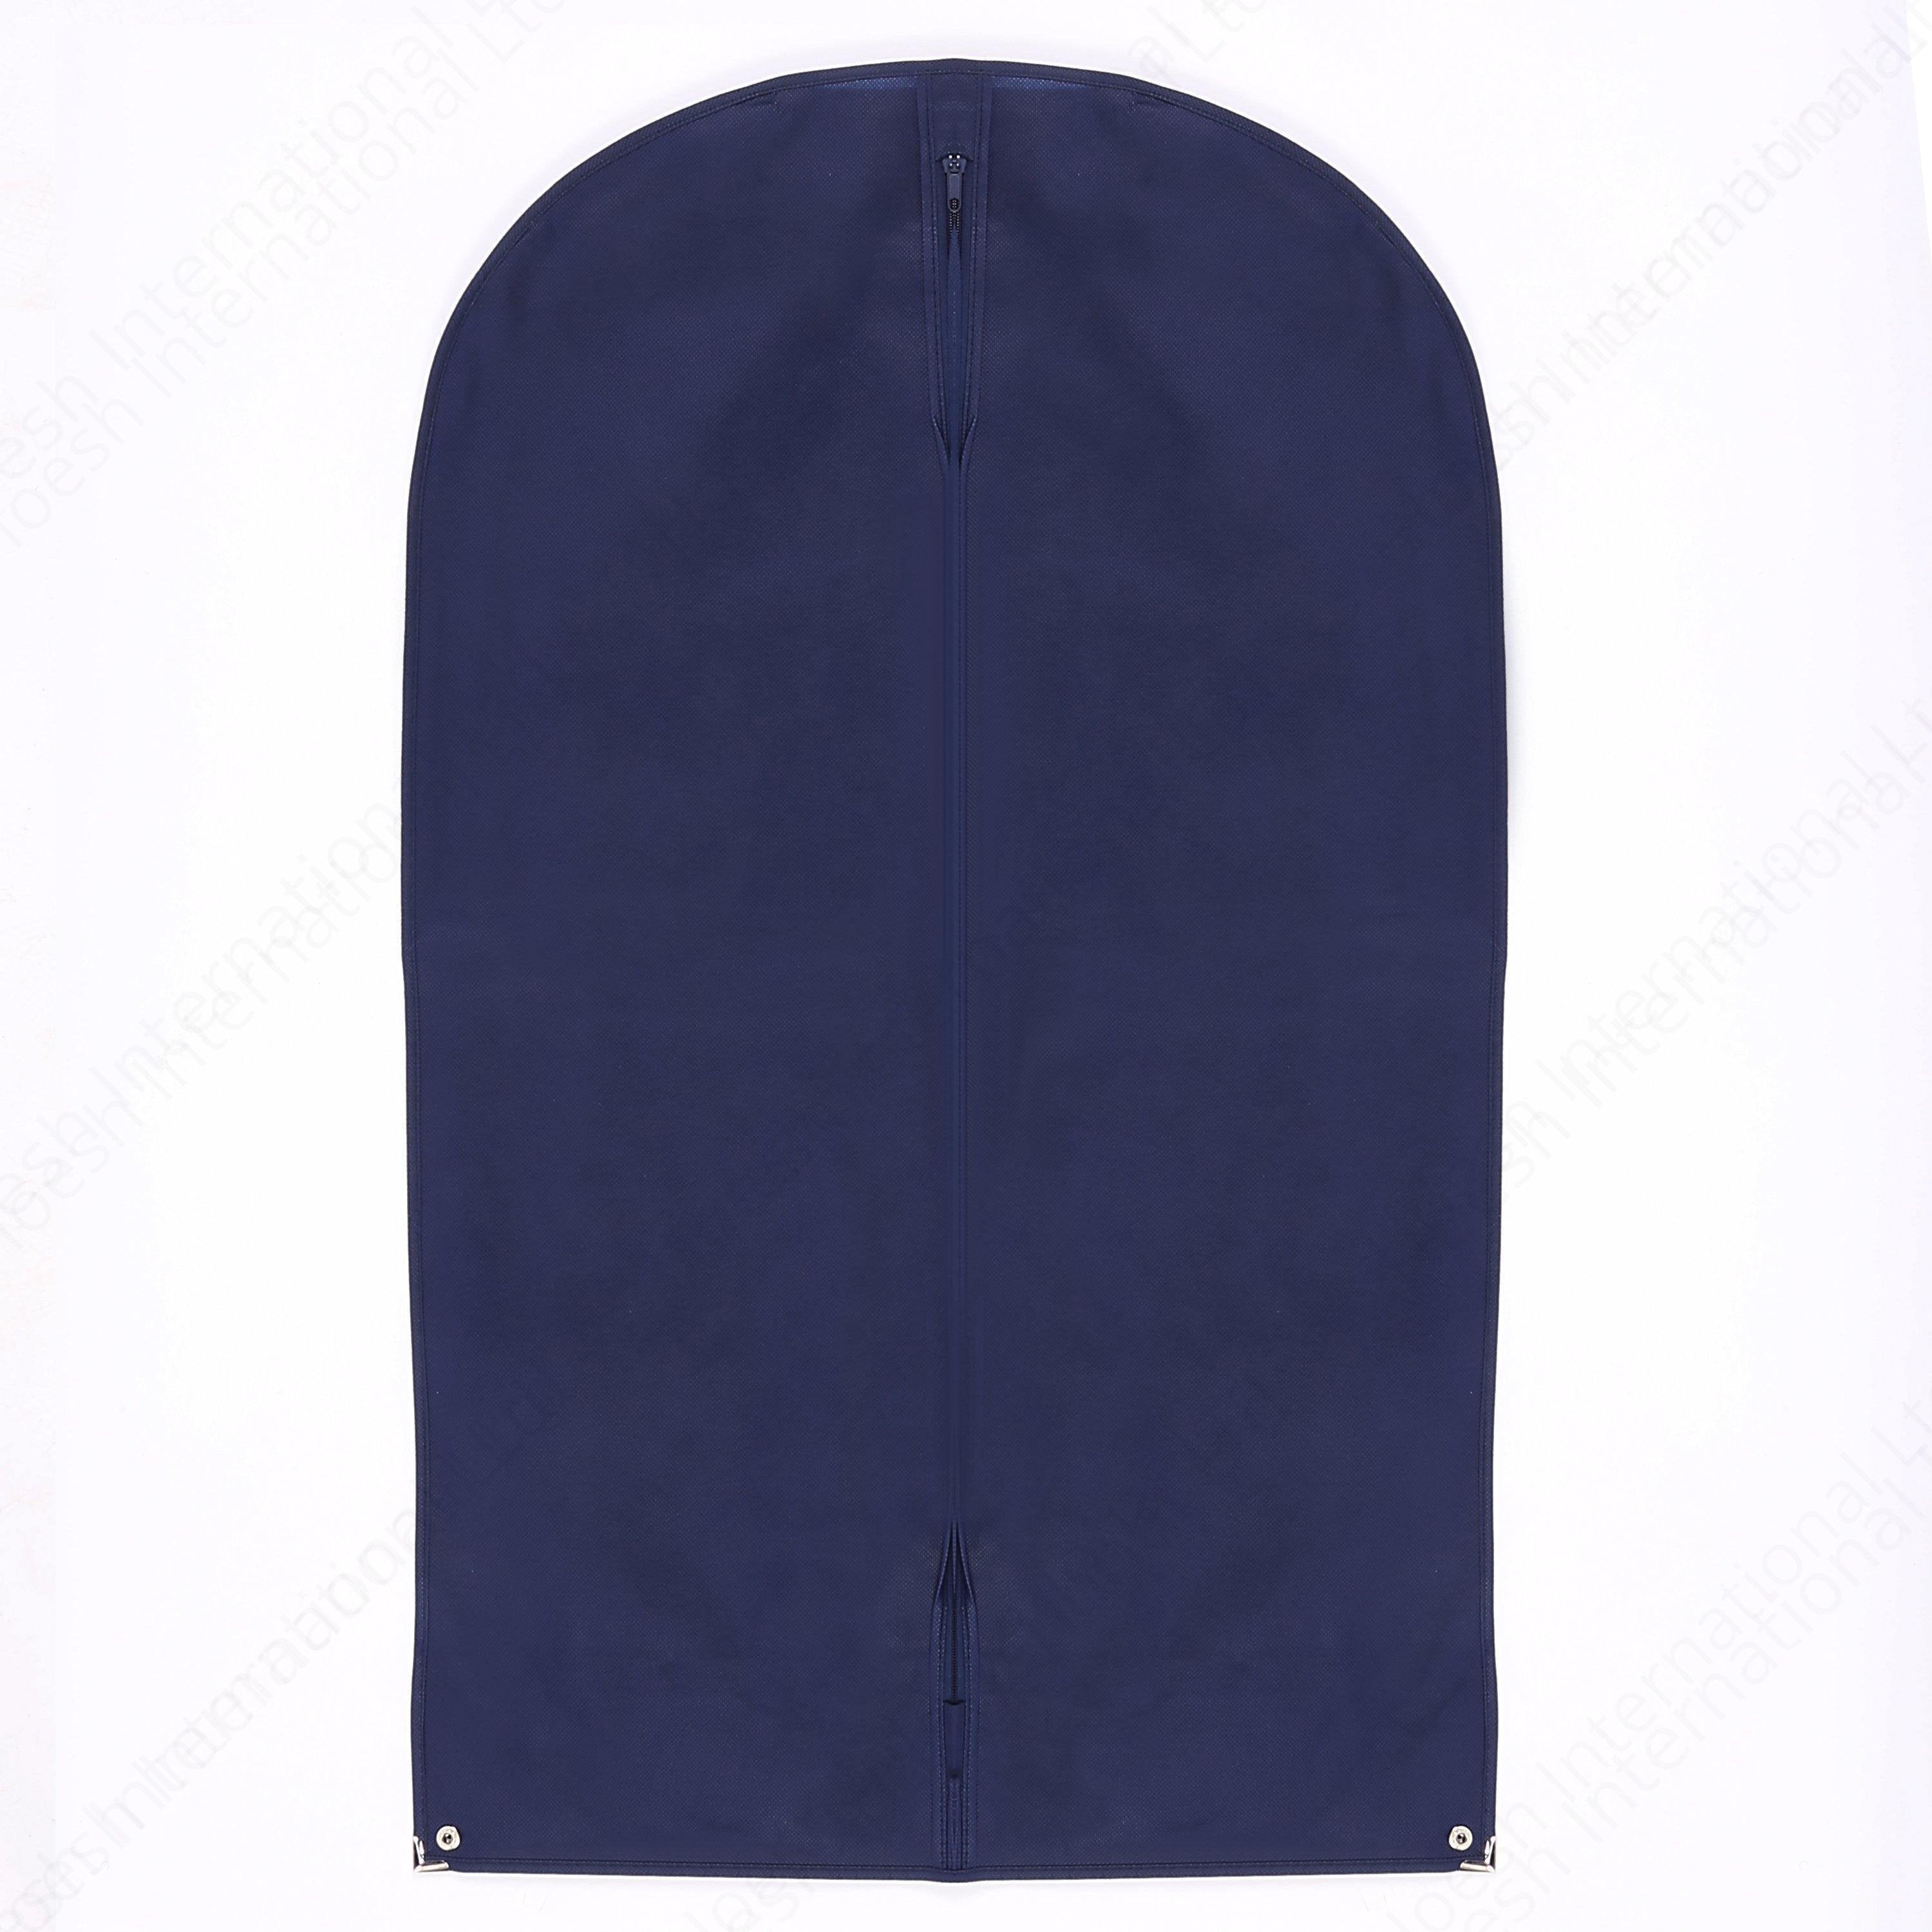 Non woven suit carrier with webbing handles - Hoesh International Ltd